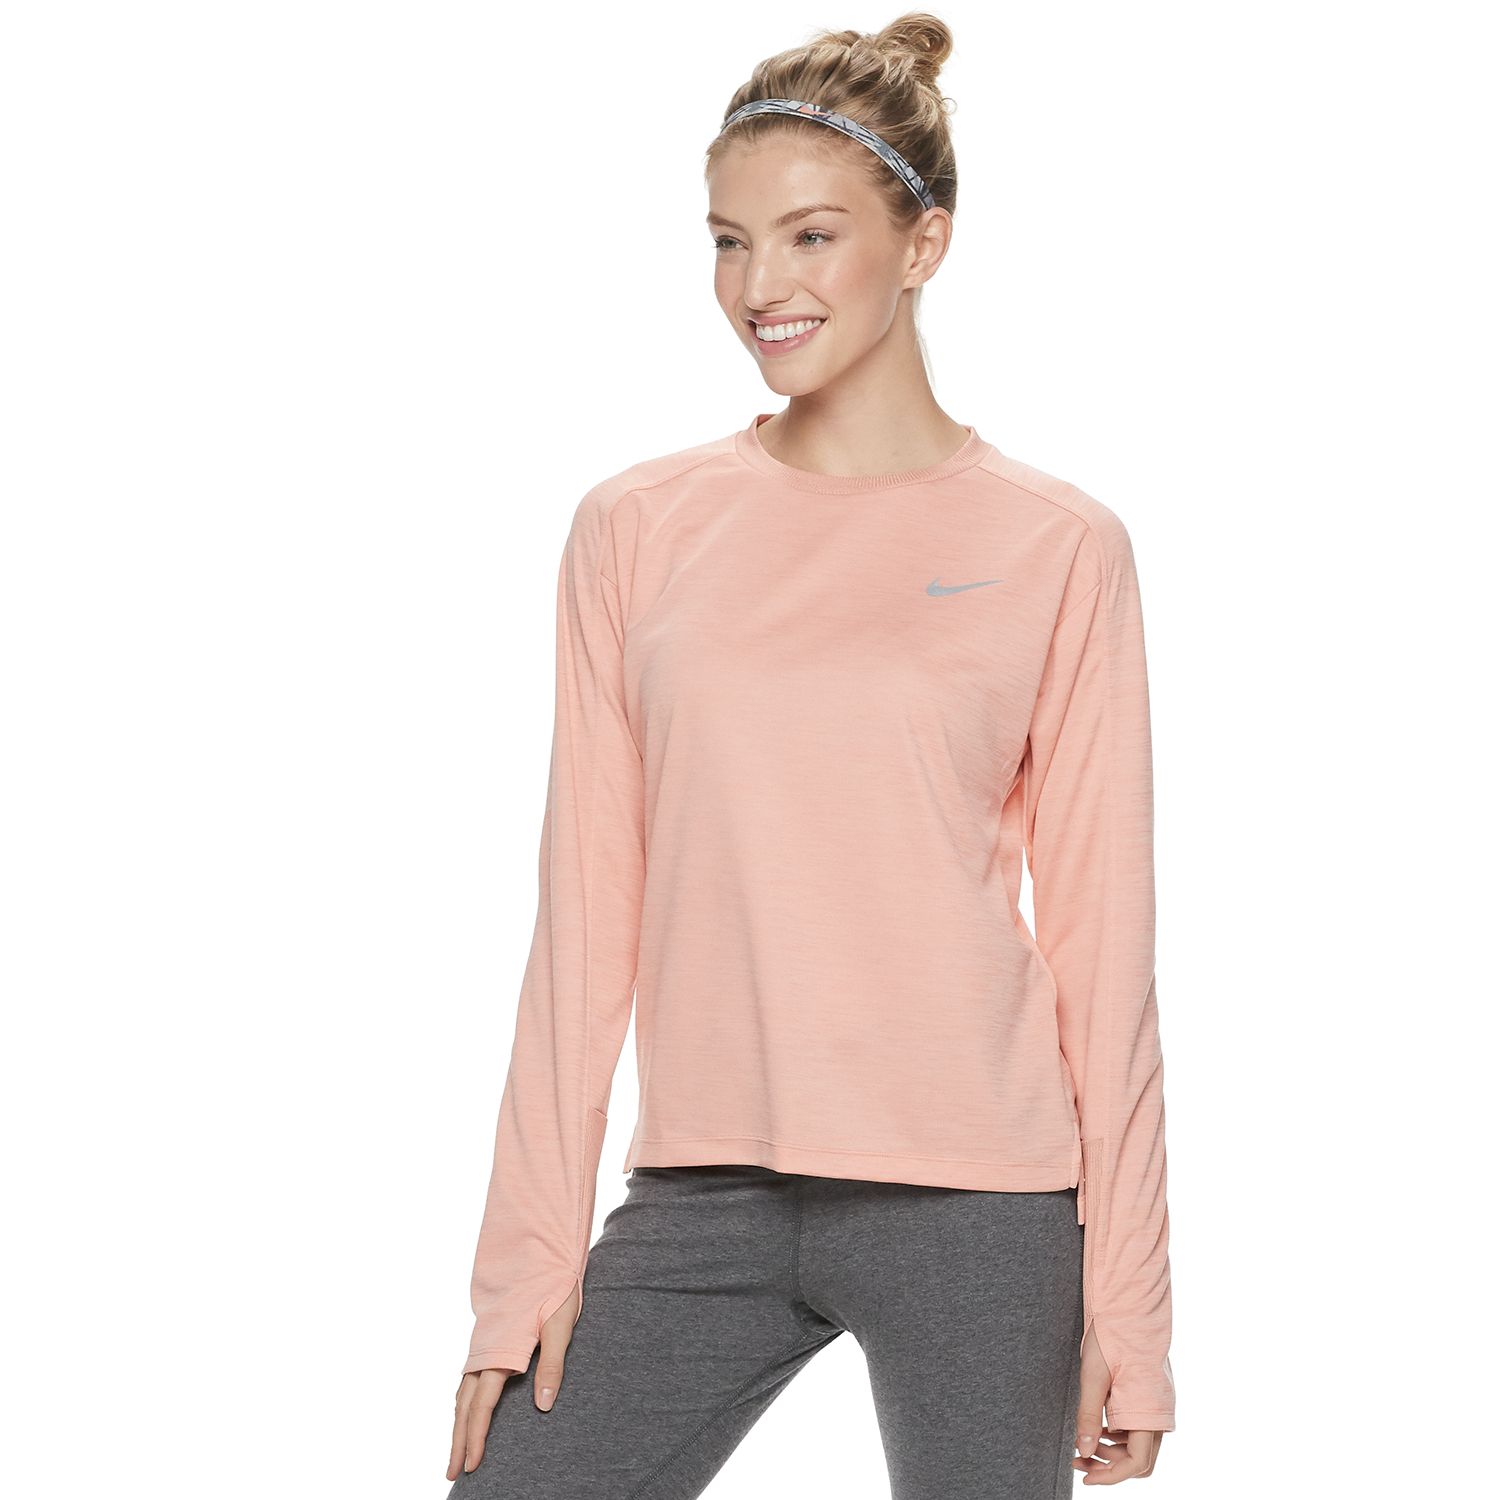 nike pacer long sleeve